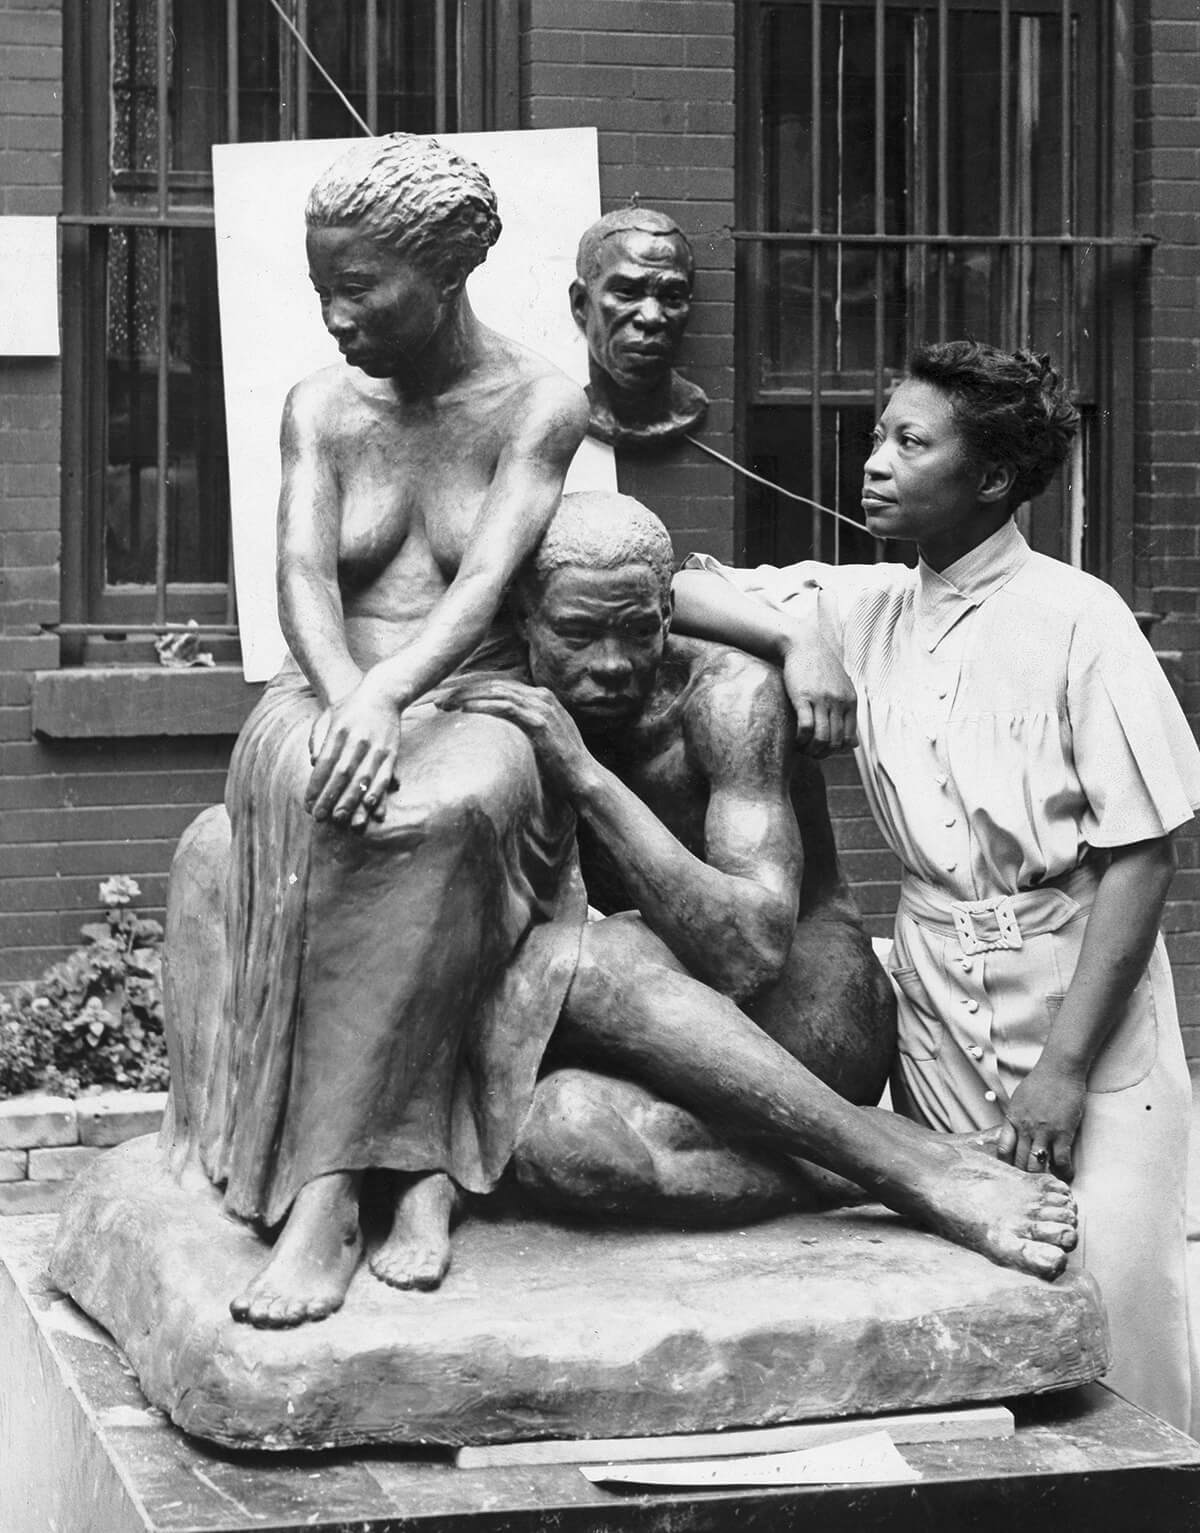 Augusta Savage with two of her statuettes, entitled “Susie Q” and Truckin’”